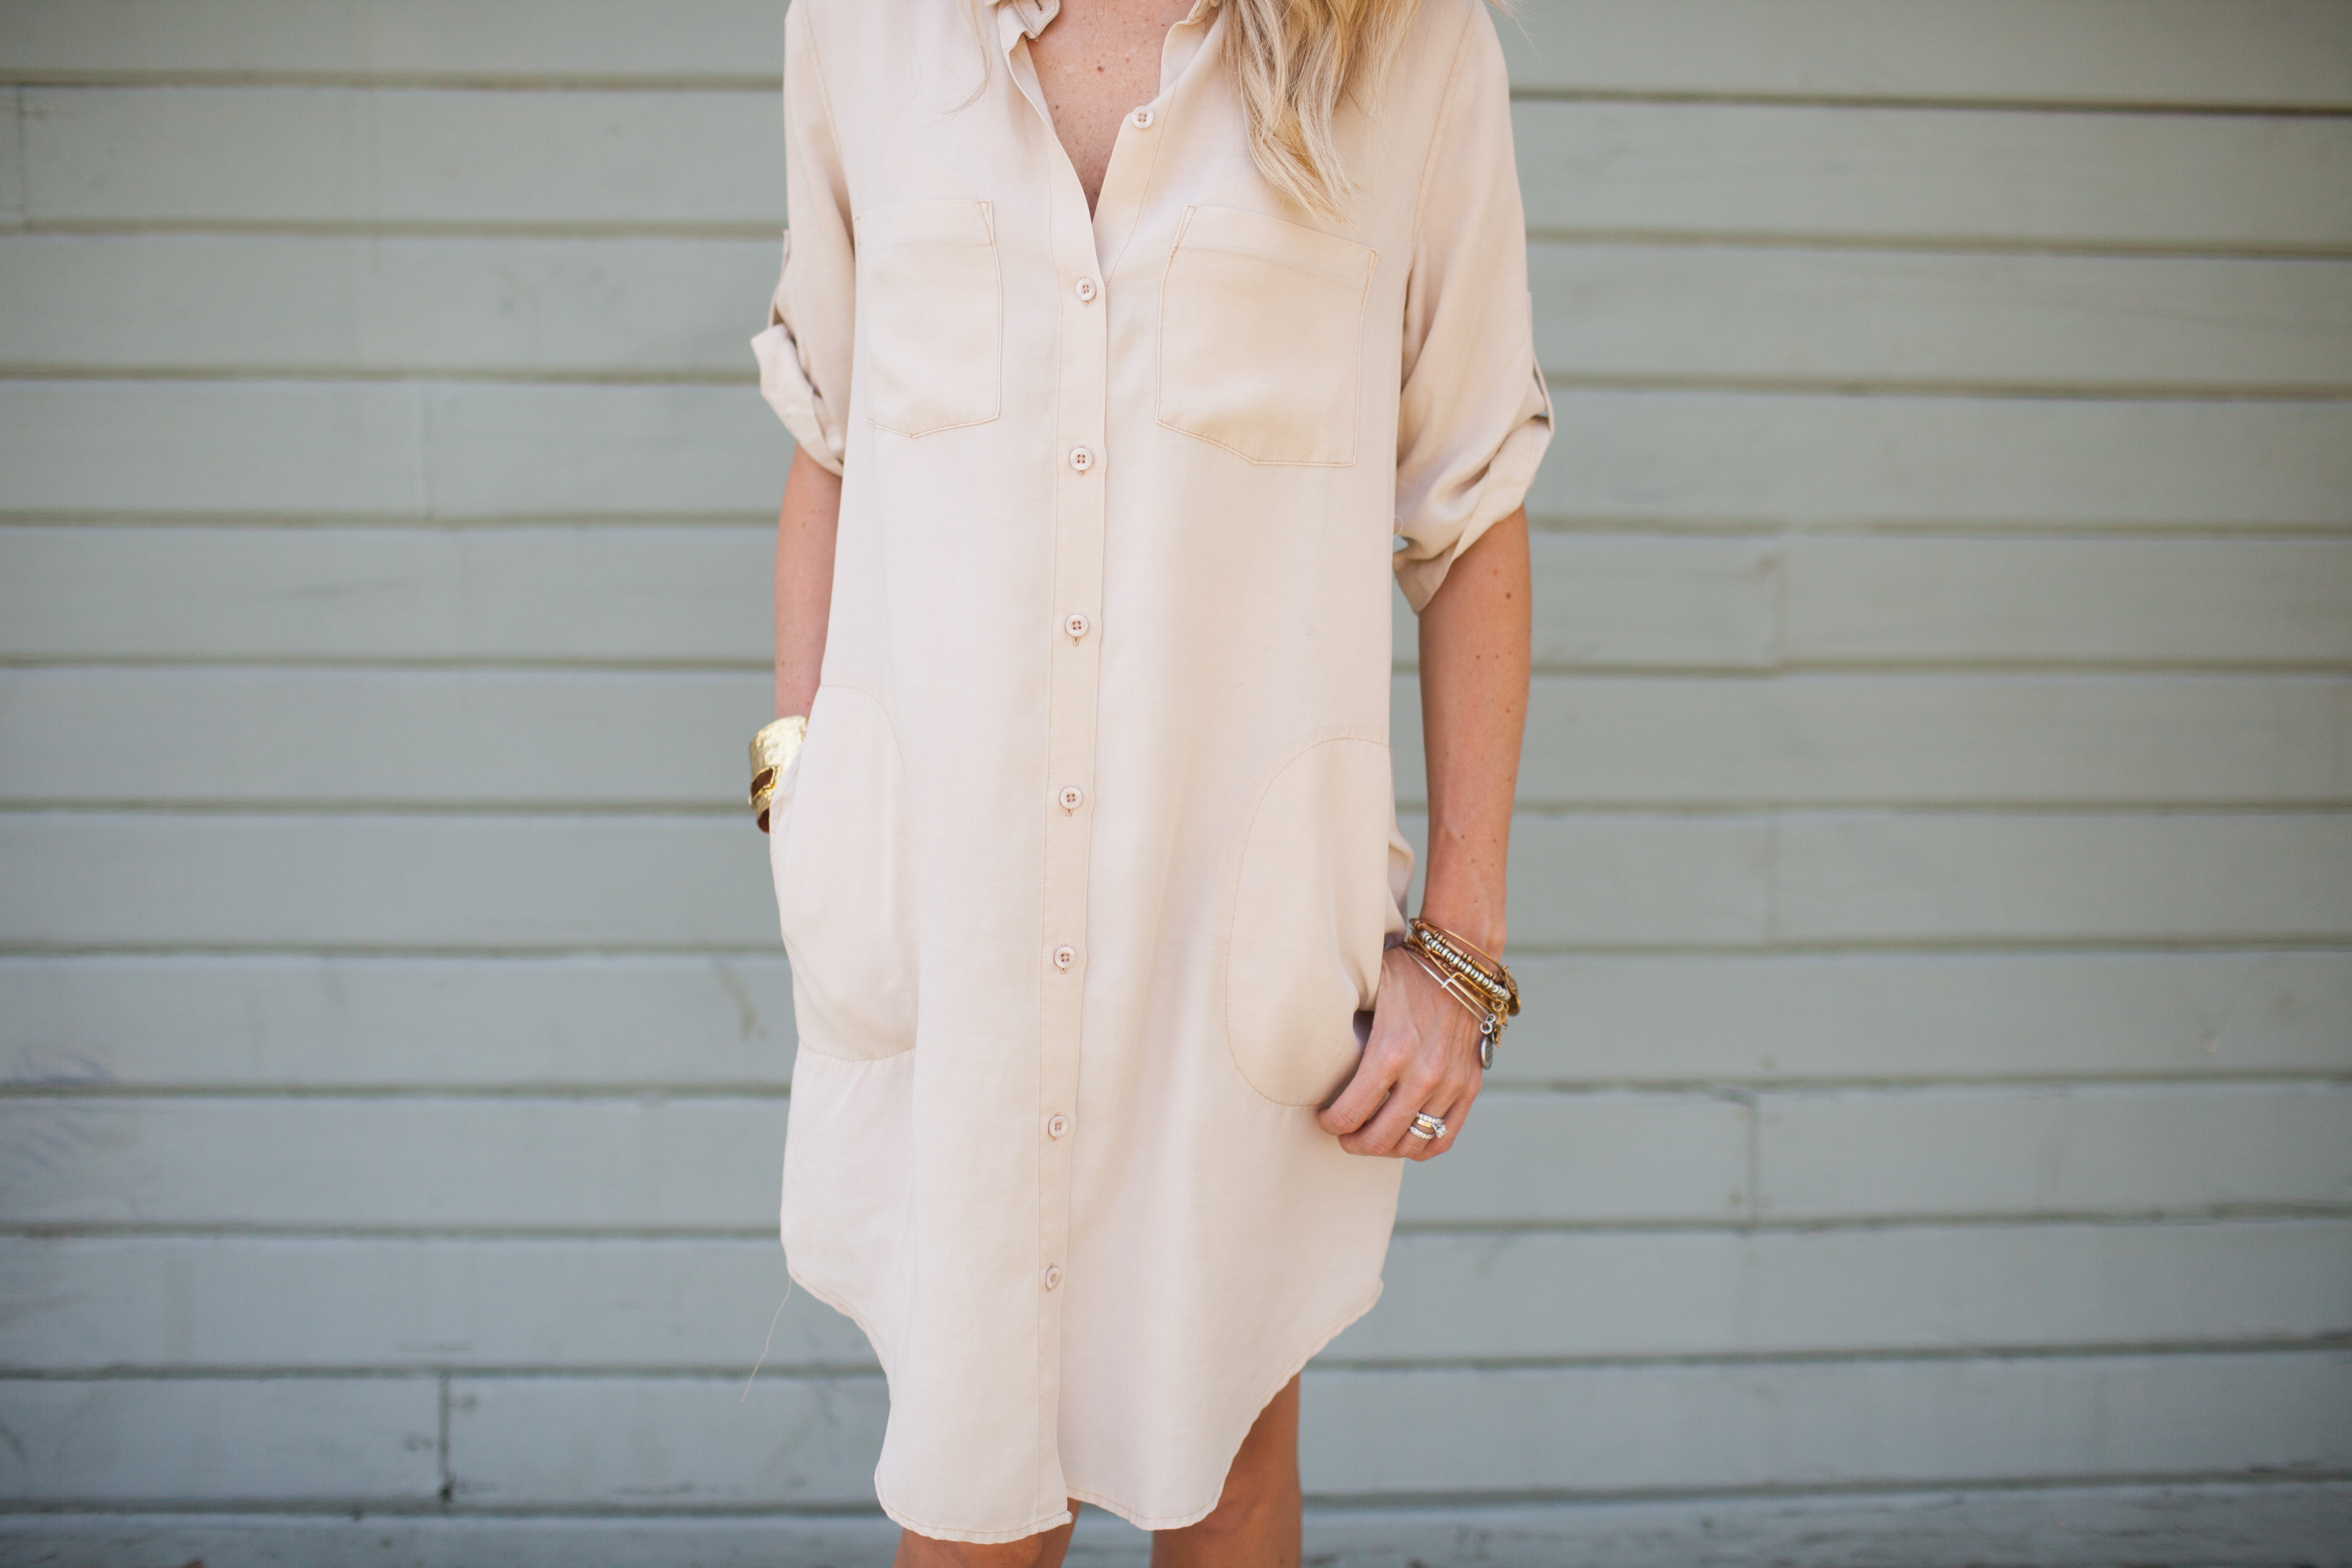 Kailee-Wright-shirtdress-nordstrom-2